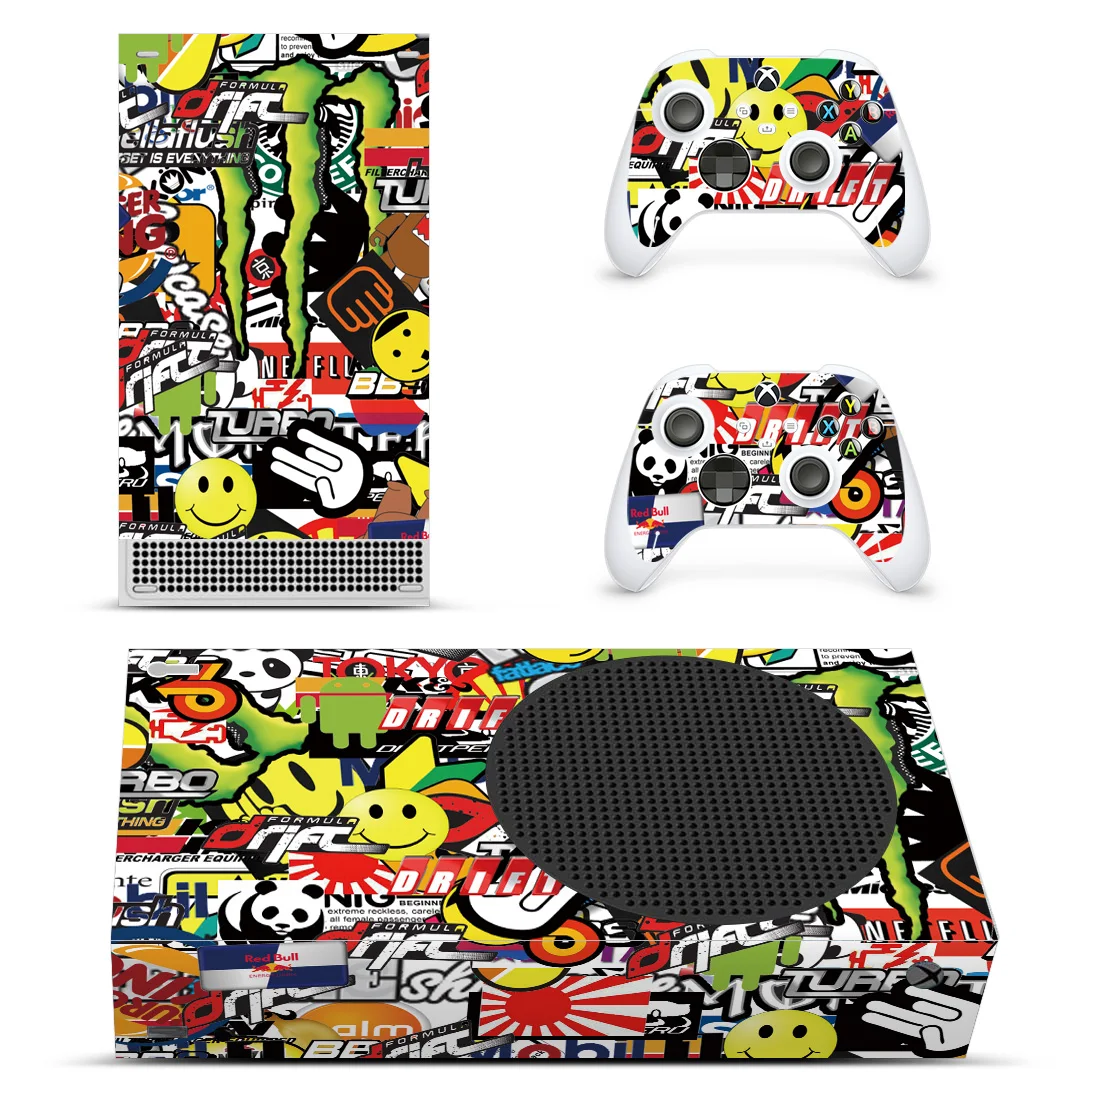 

New Custom Vinyl Decal Skin Stickers Cover for Xbox Series X Console Game Controllers Skins